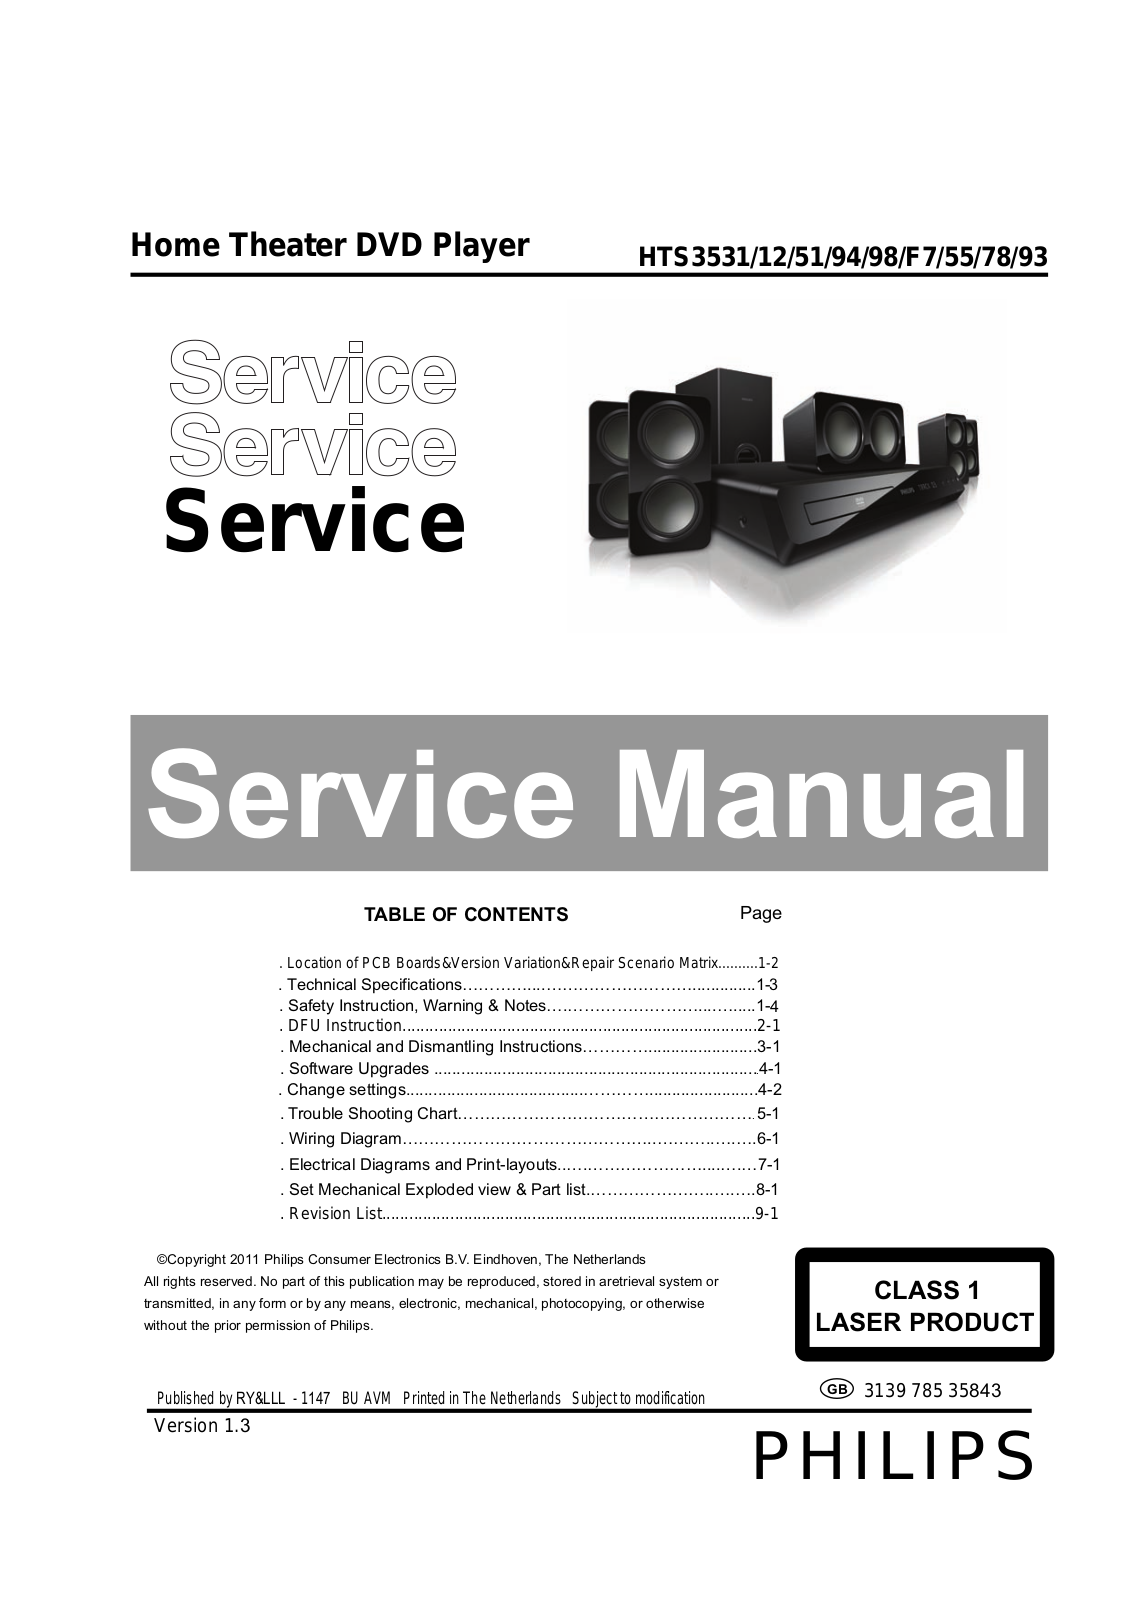 Philips HTS-3531 Service Manual